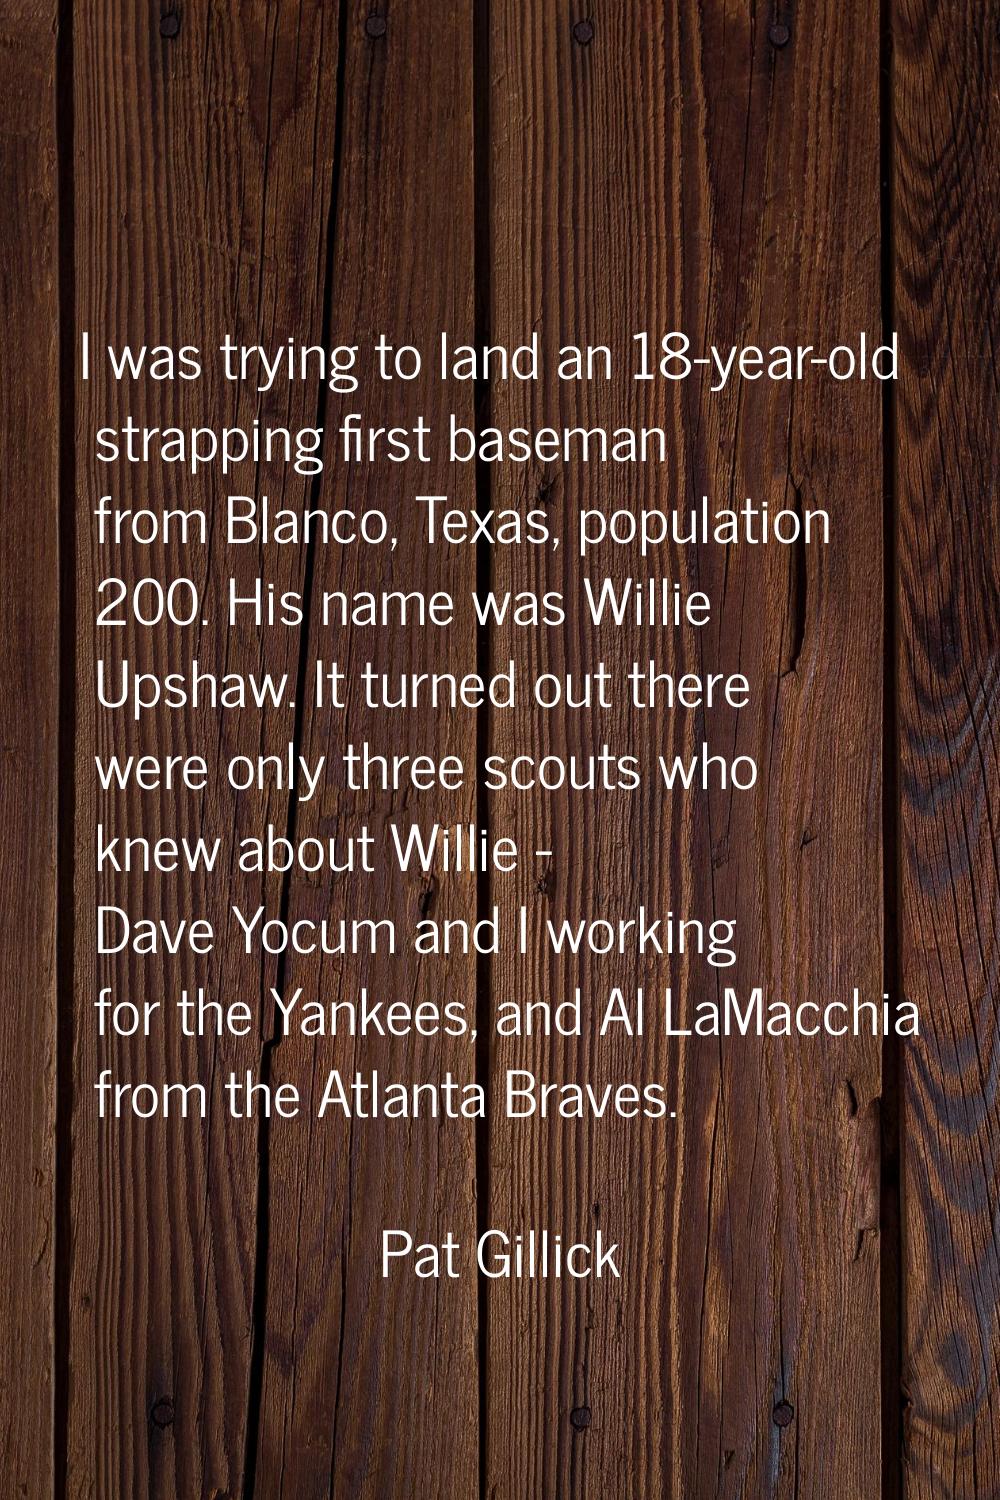 I was trying to land an 18-year-old strapping first baseman from Blanco, Texas, population 200. His